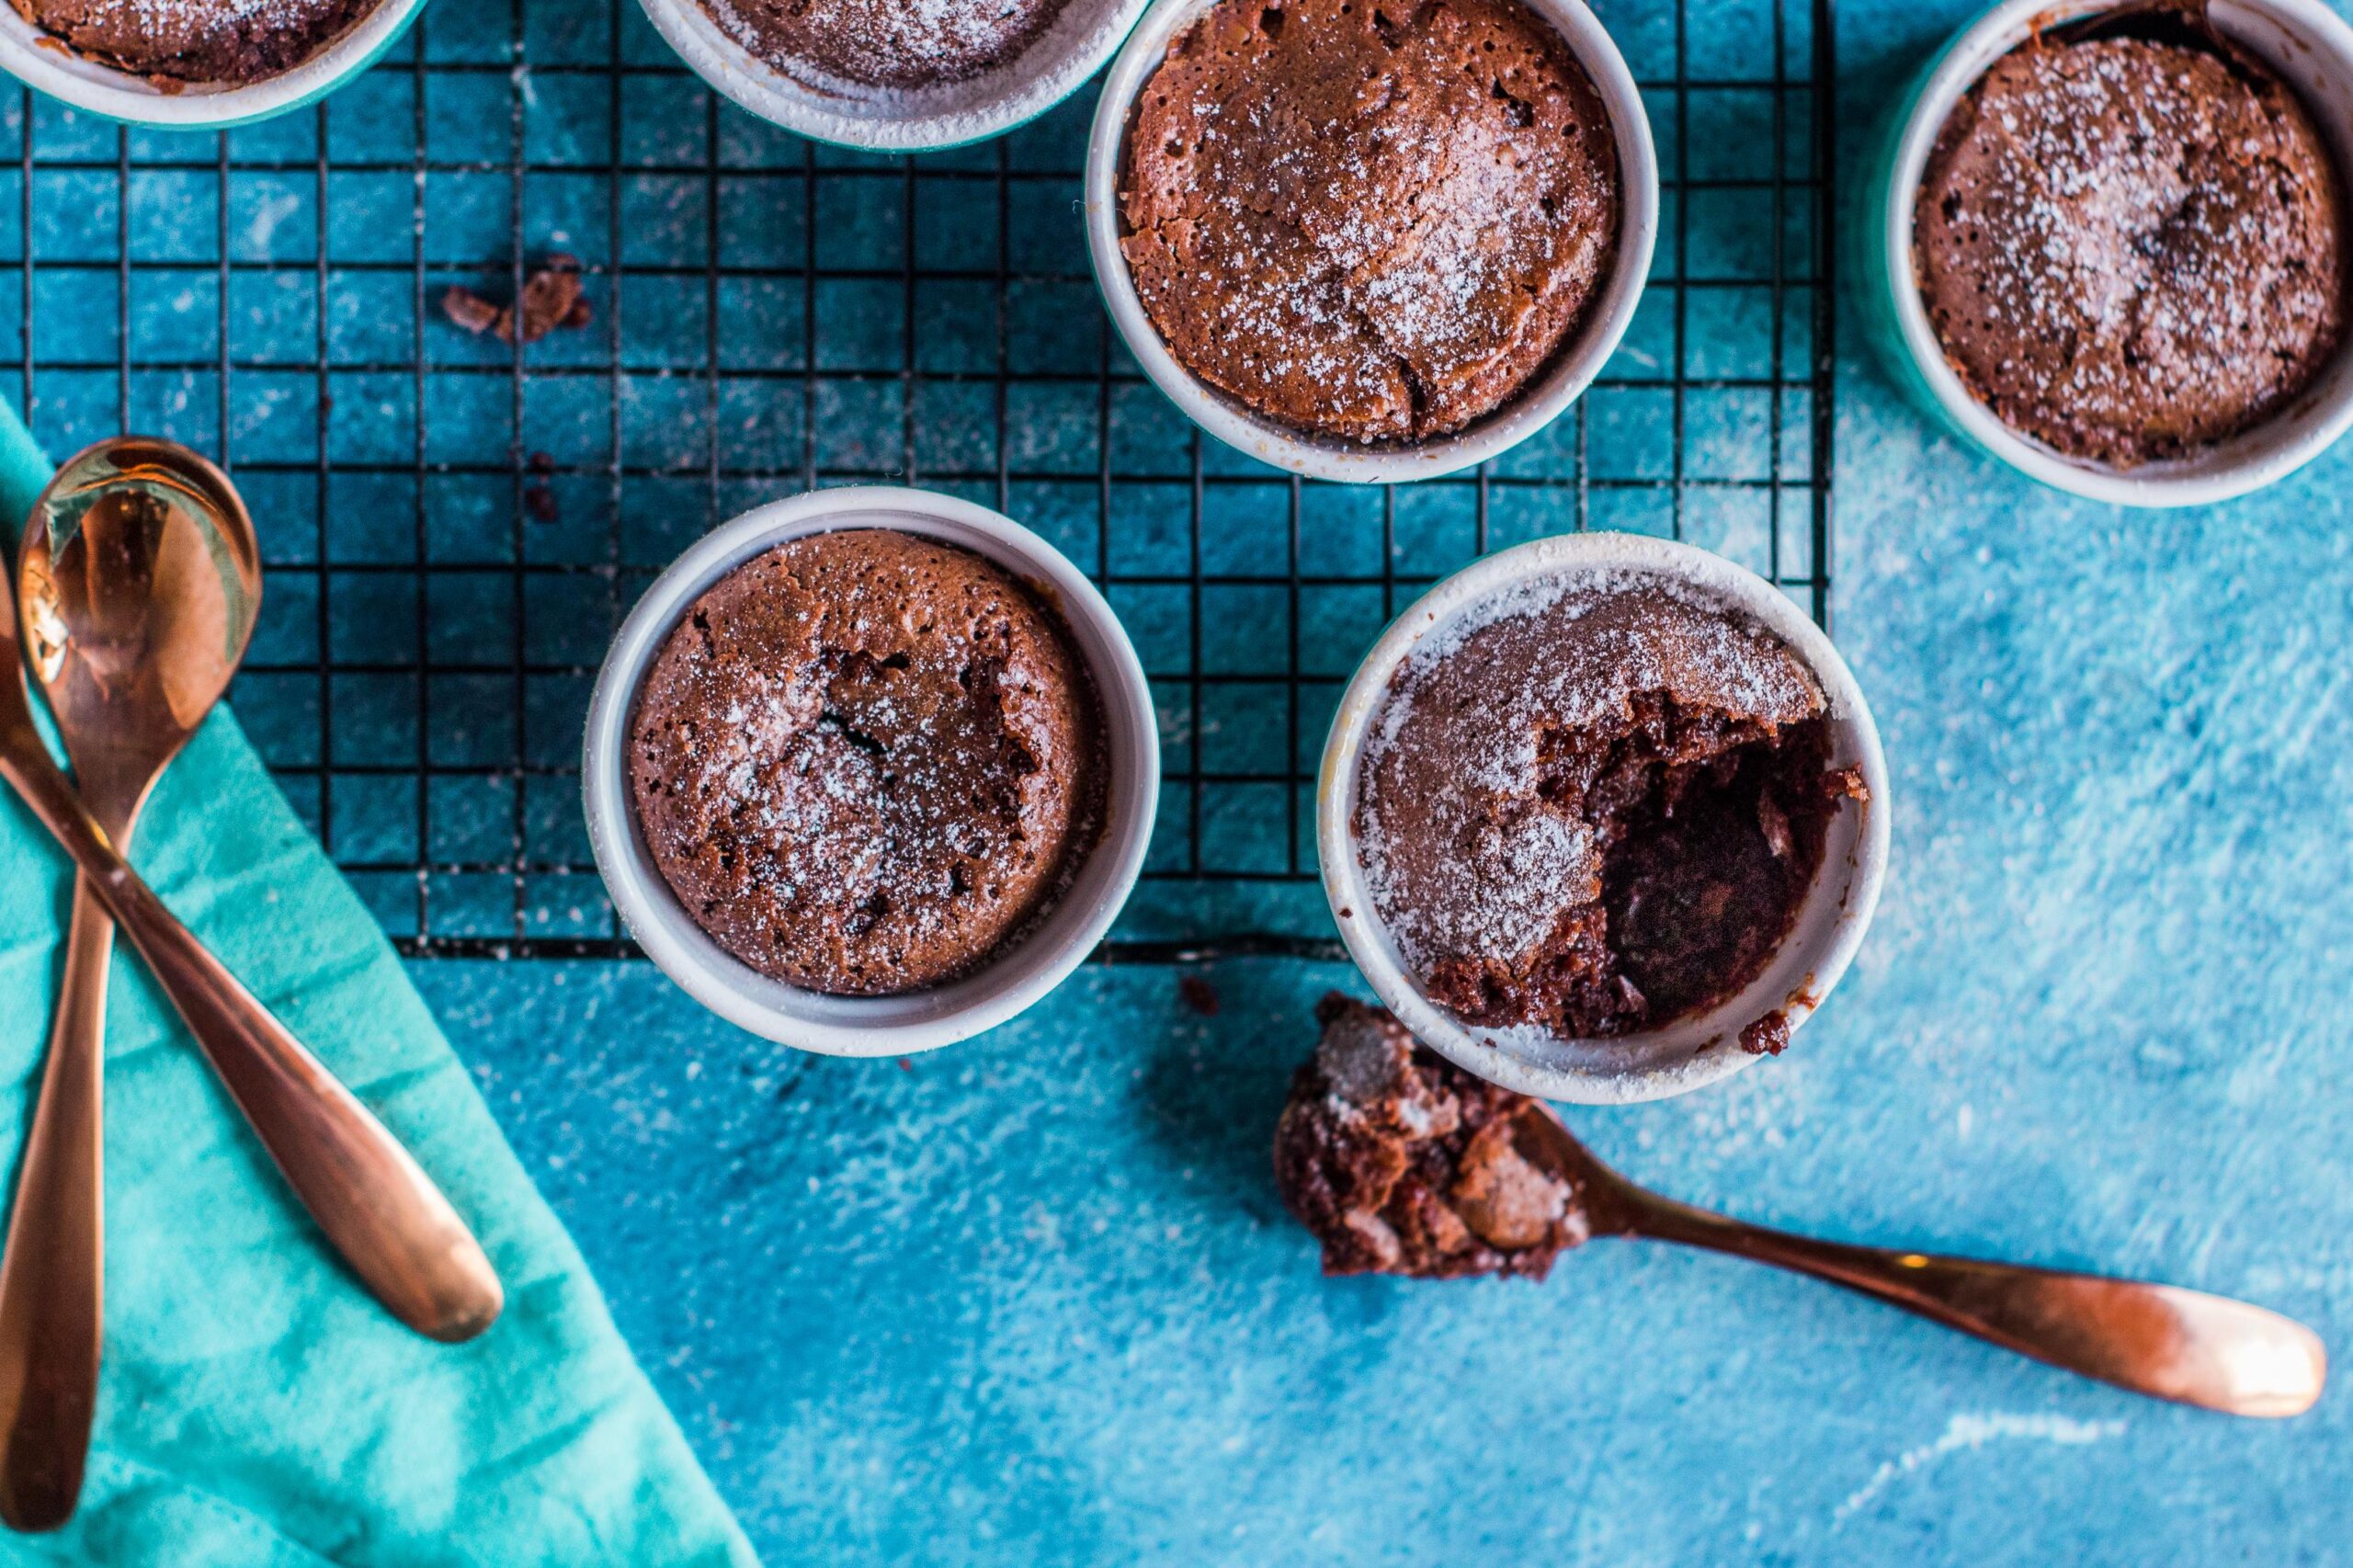  Chocolate Souffle with Dulce de Leche Sauce: The ultimate dessert for any chocolate lover out there.